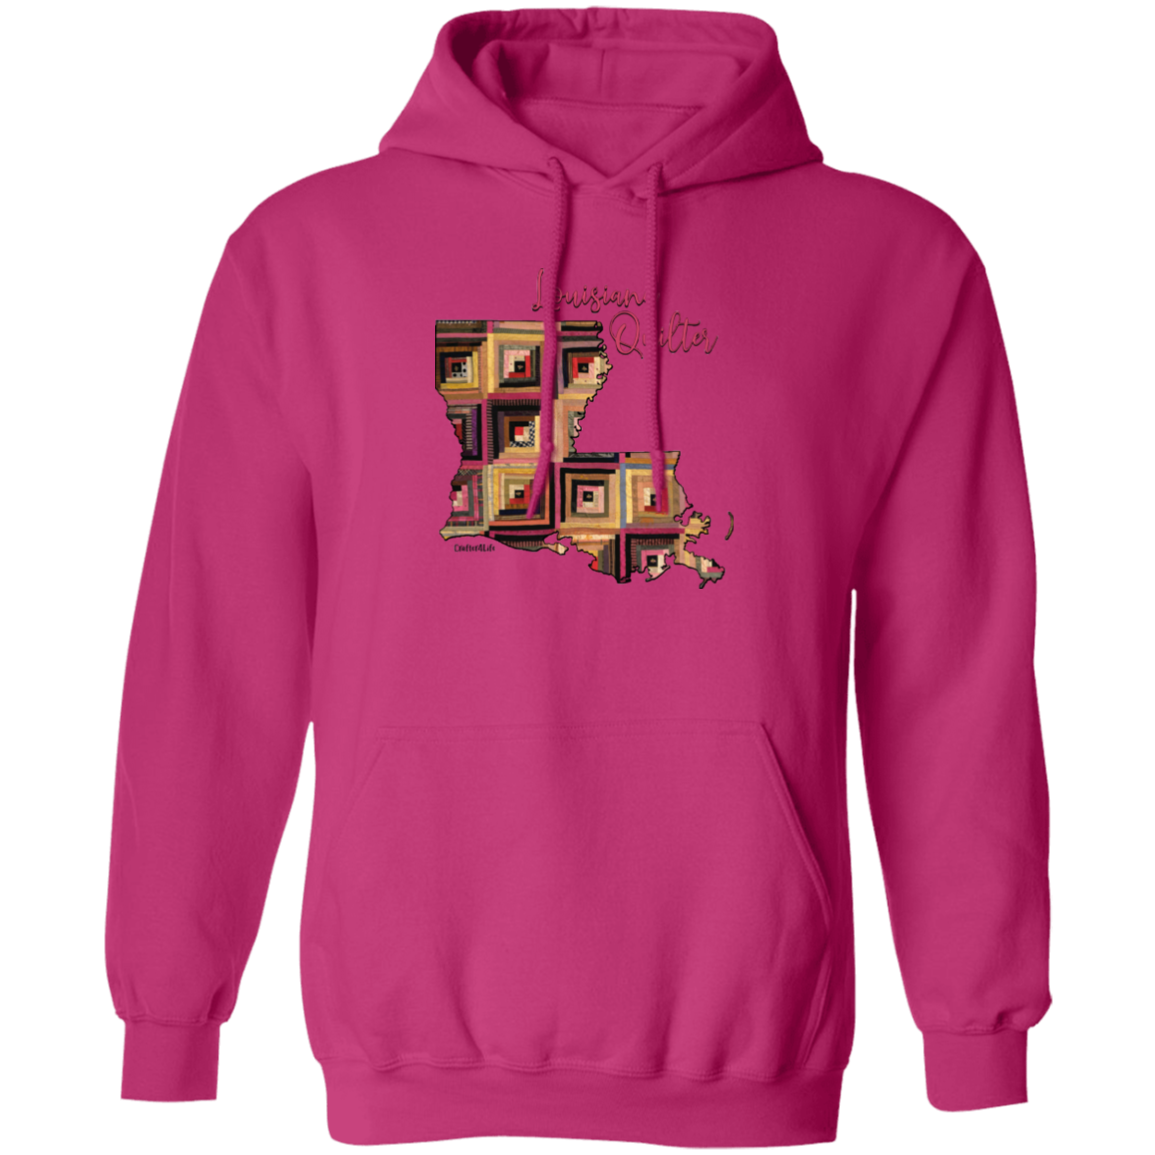 Louisiana Quilter Pullover Hoodie, Gift for Quilting Friends and Family